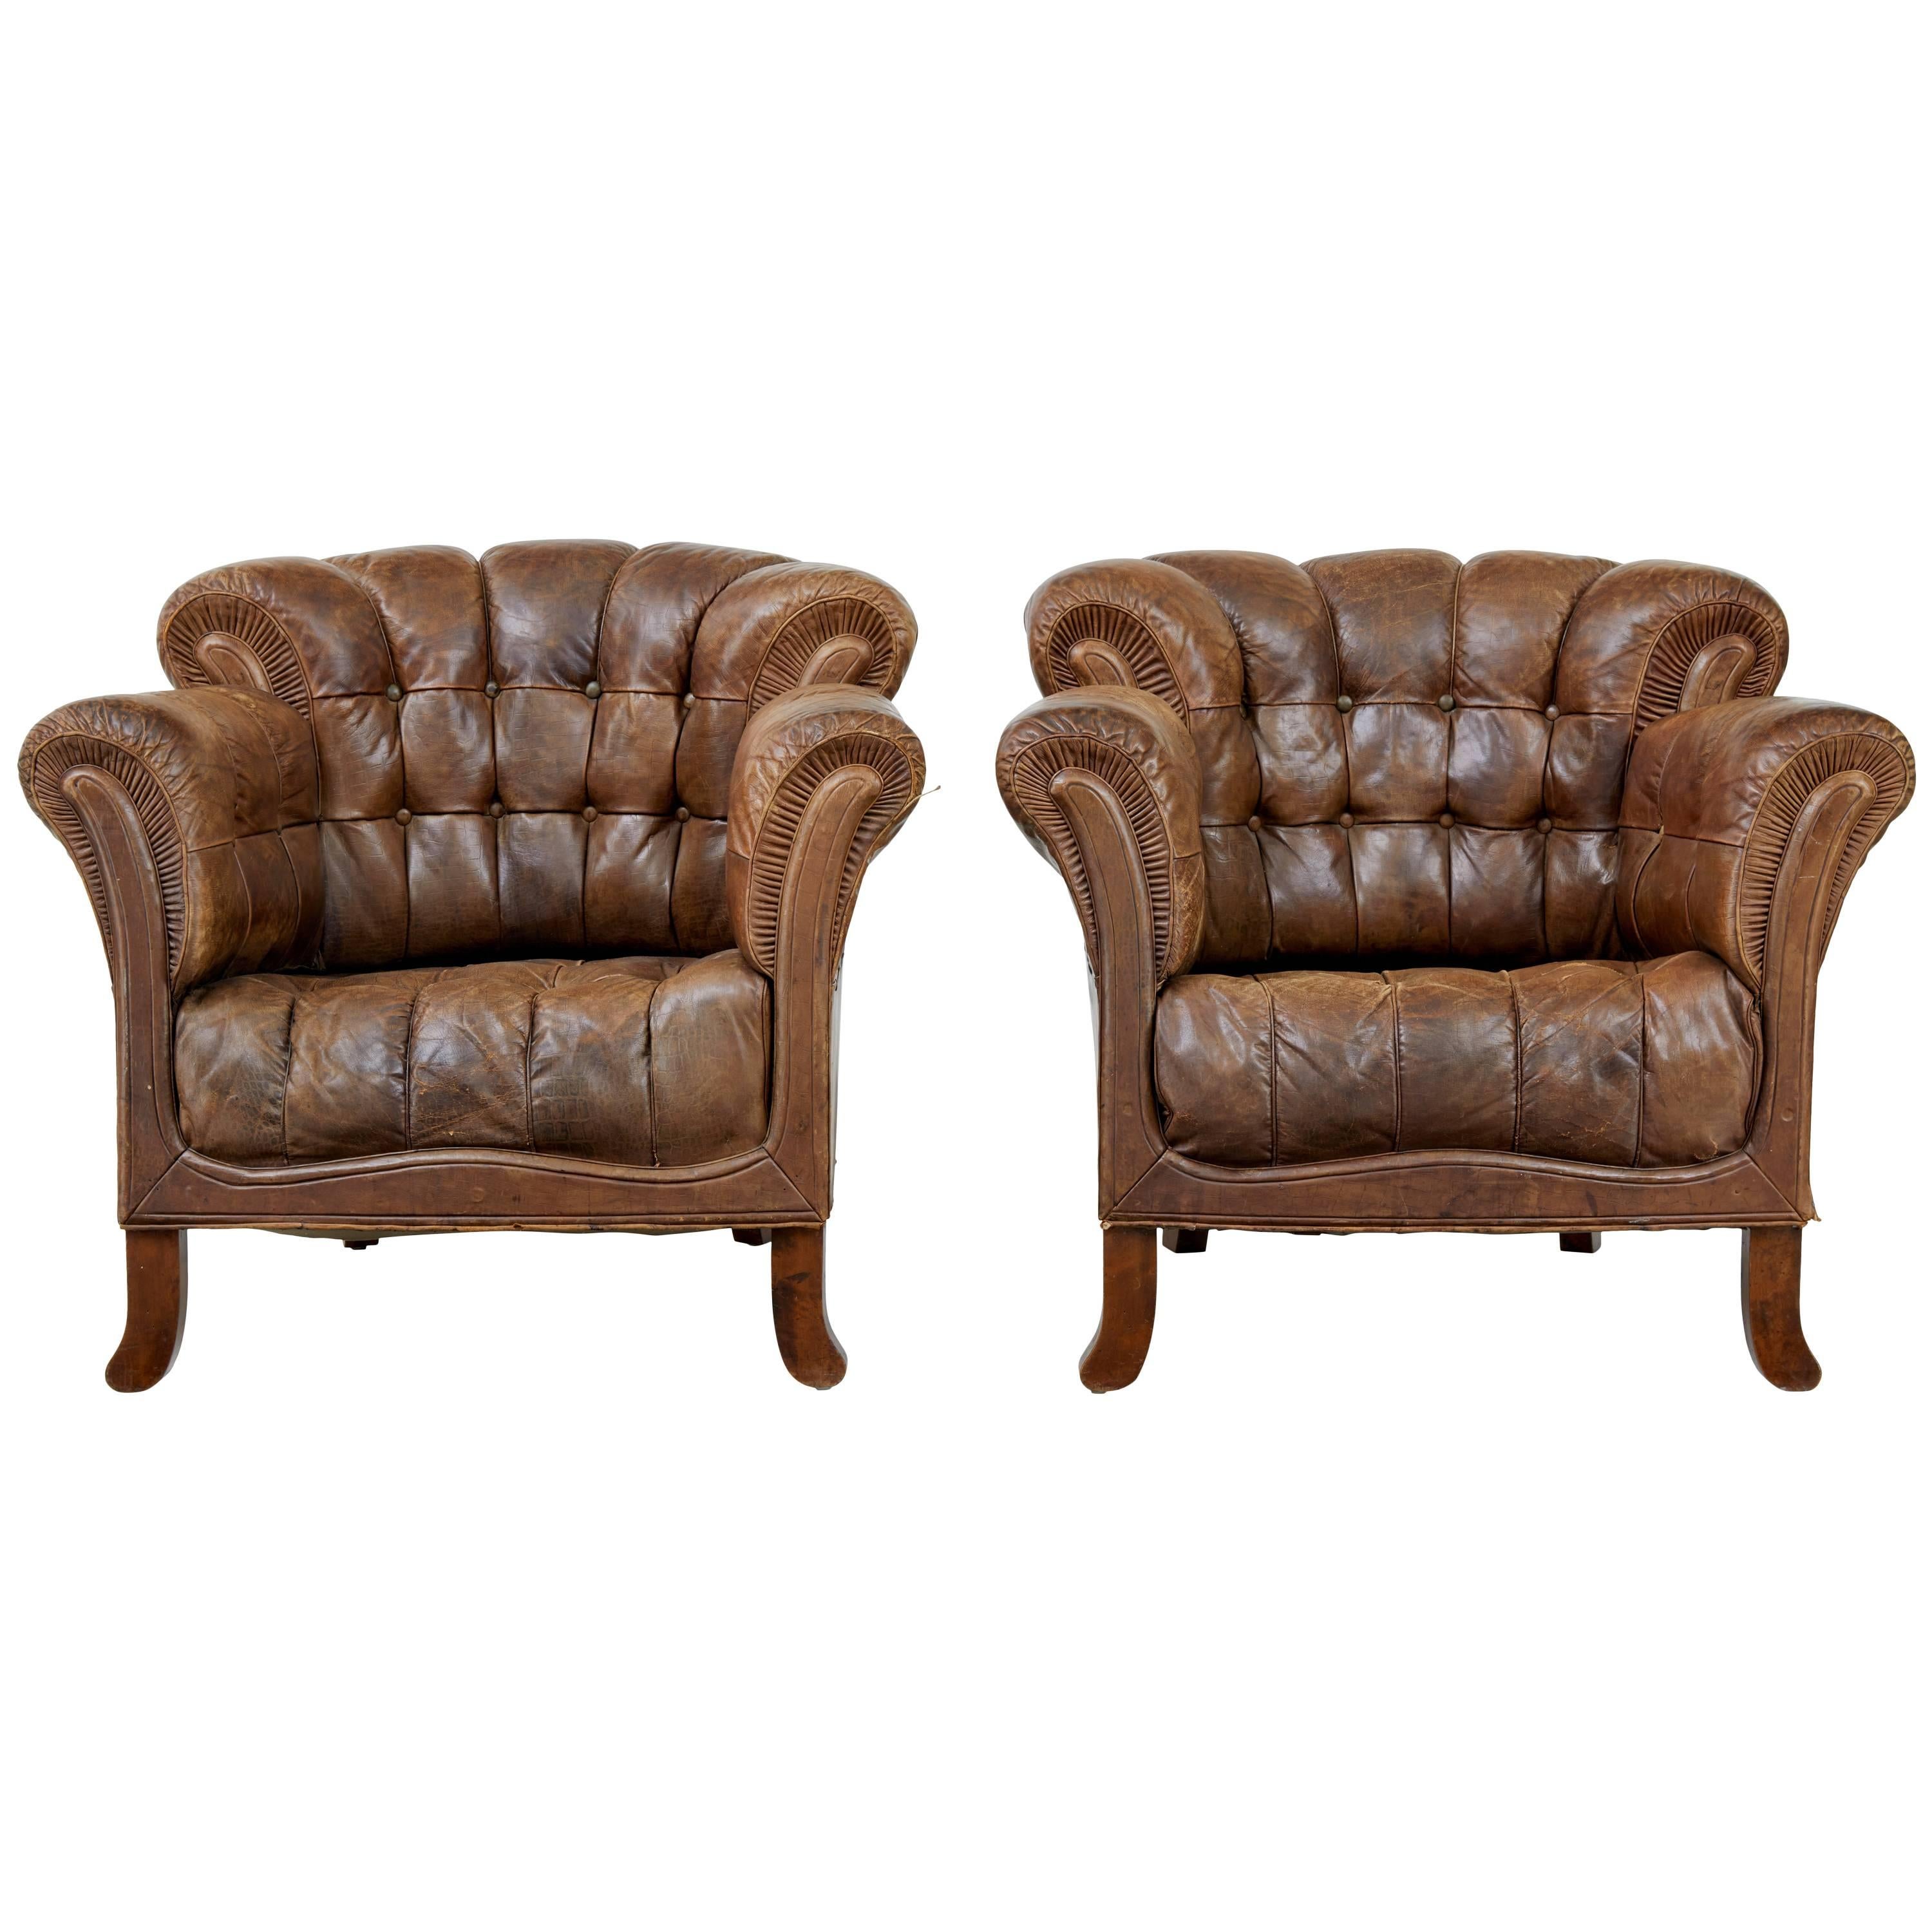 Pair of Early 20th Century Leather Armchairs